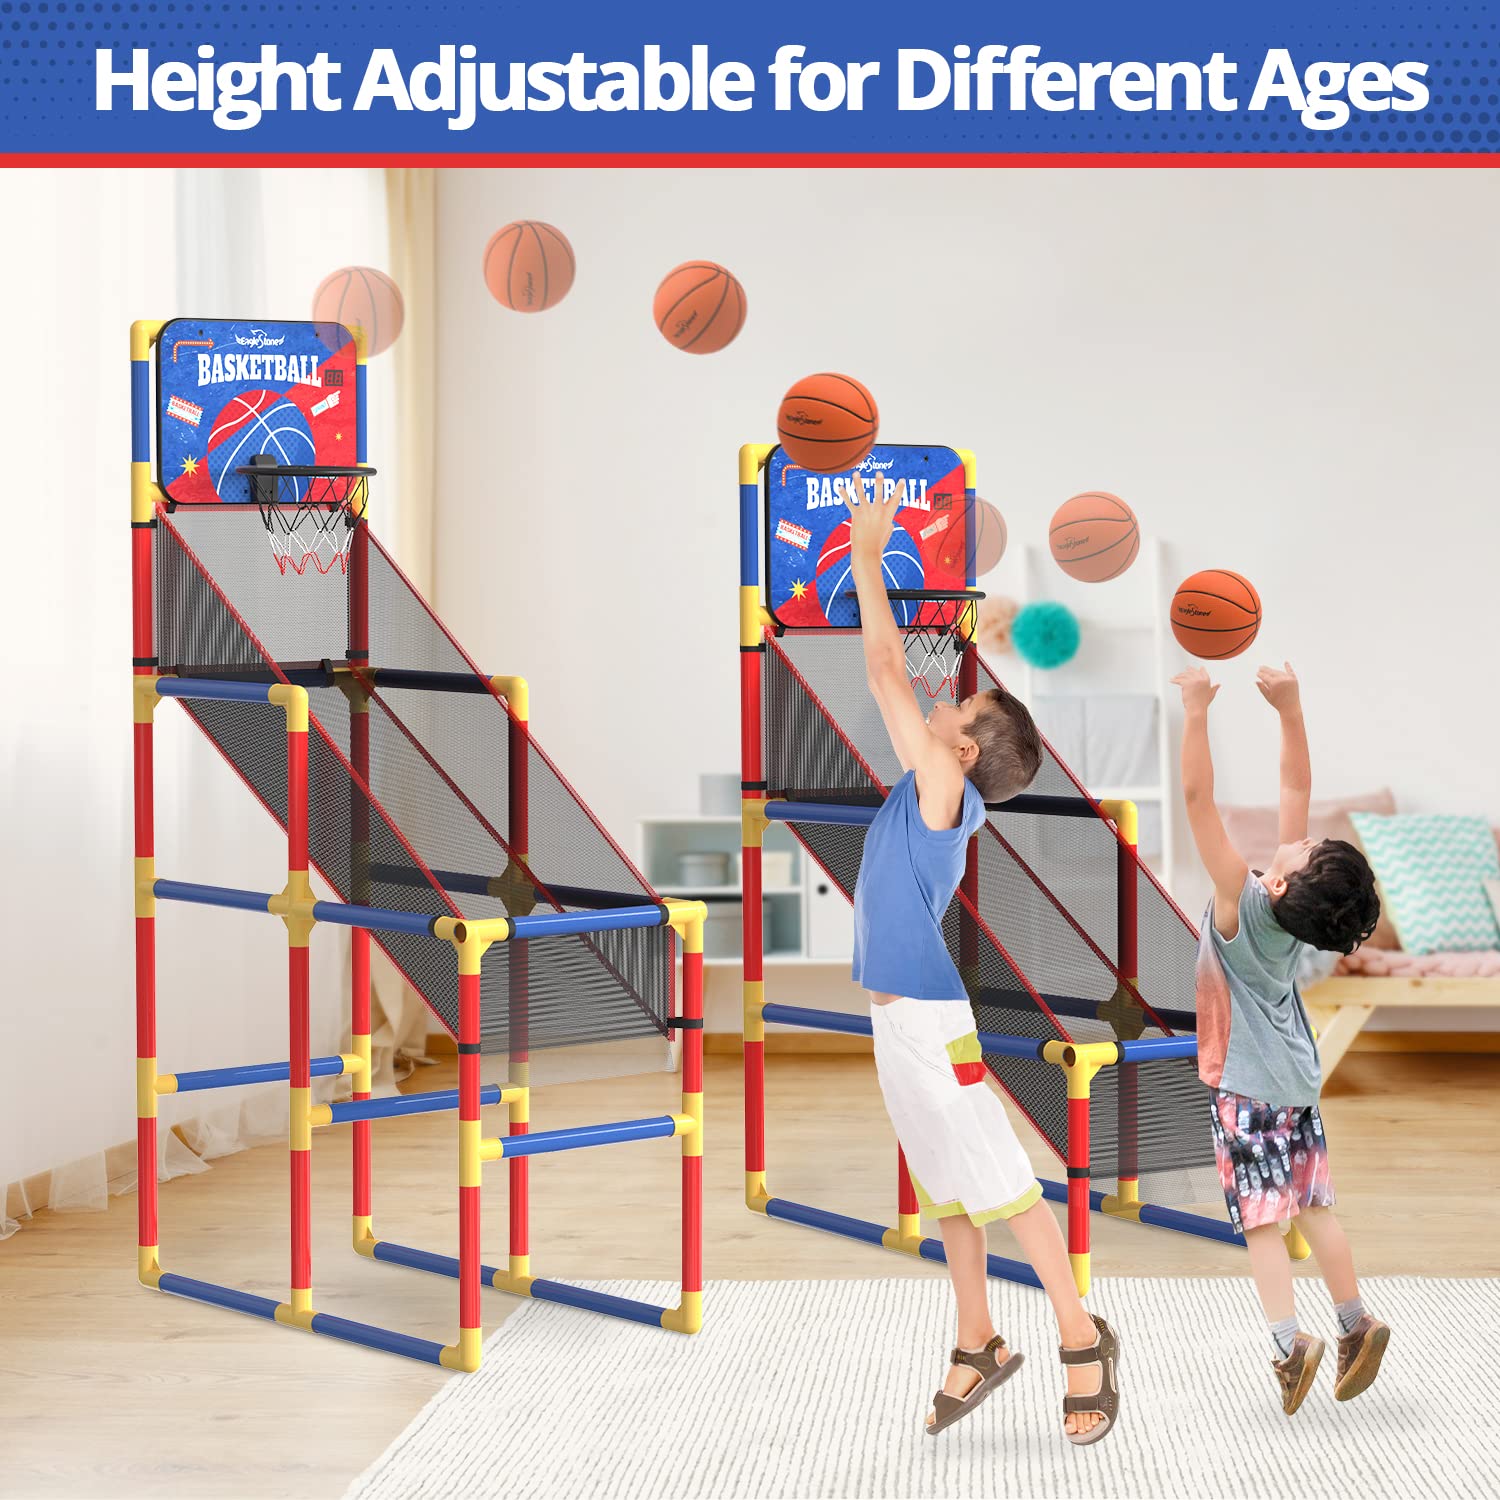 EagleStone Basketball Hoop Arcade Game Indoor W/Electronic Scoreboard, Basketball Hoop Outdoor for Kids with 4 Balls, Cheer Sound. Toddler Basketball Sports Toys, Basketball Gift for Boys & Girls…